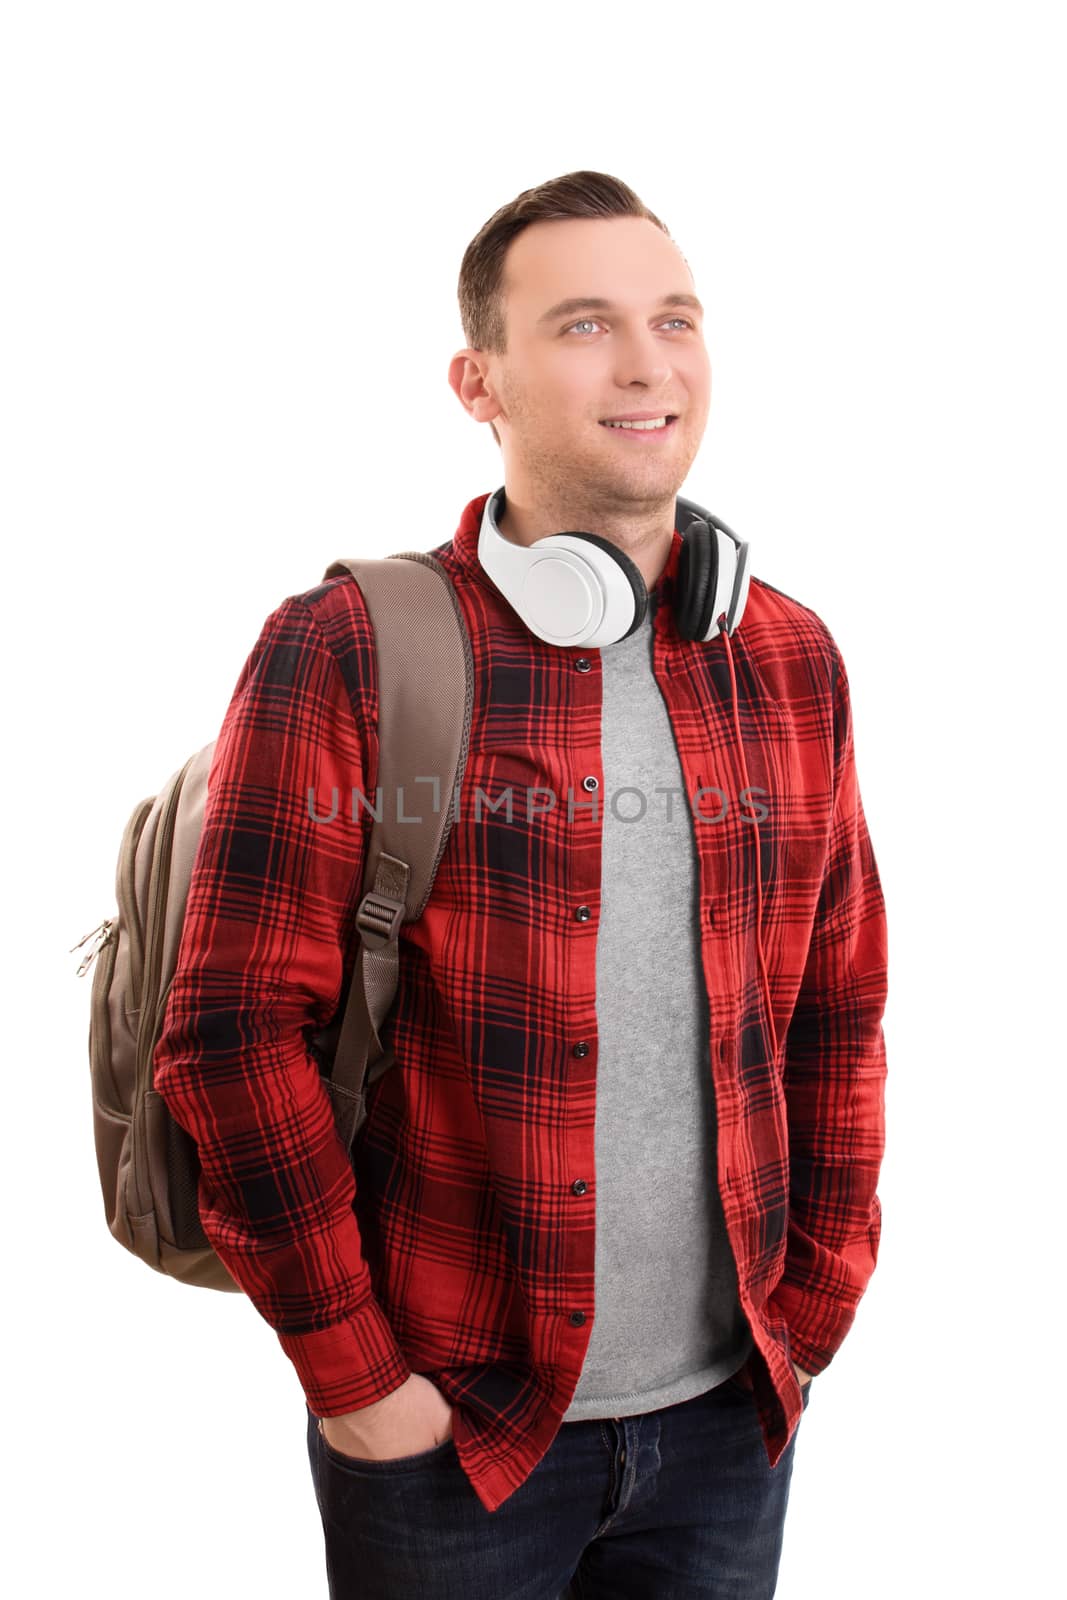 A portrait of a smiling male student, wearing a backpack and headphones, isolated on white background.